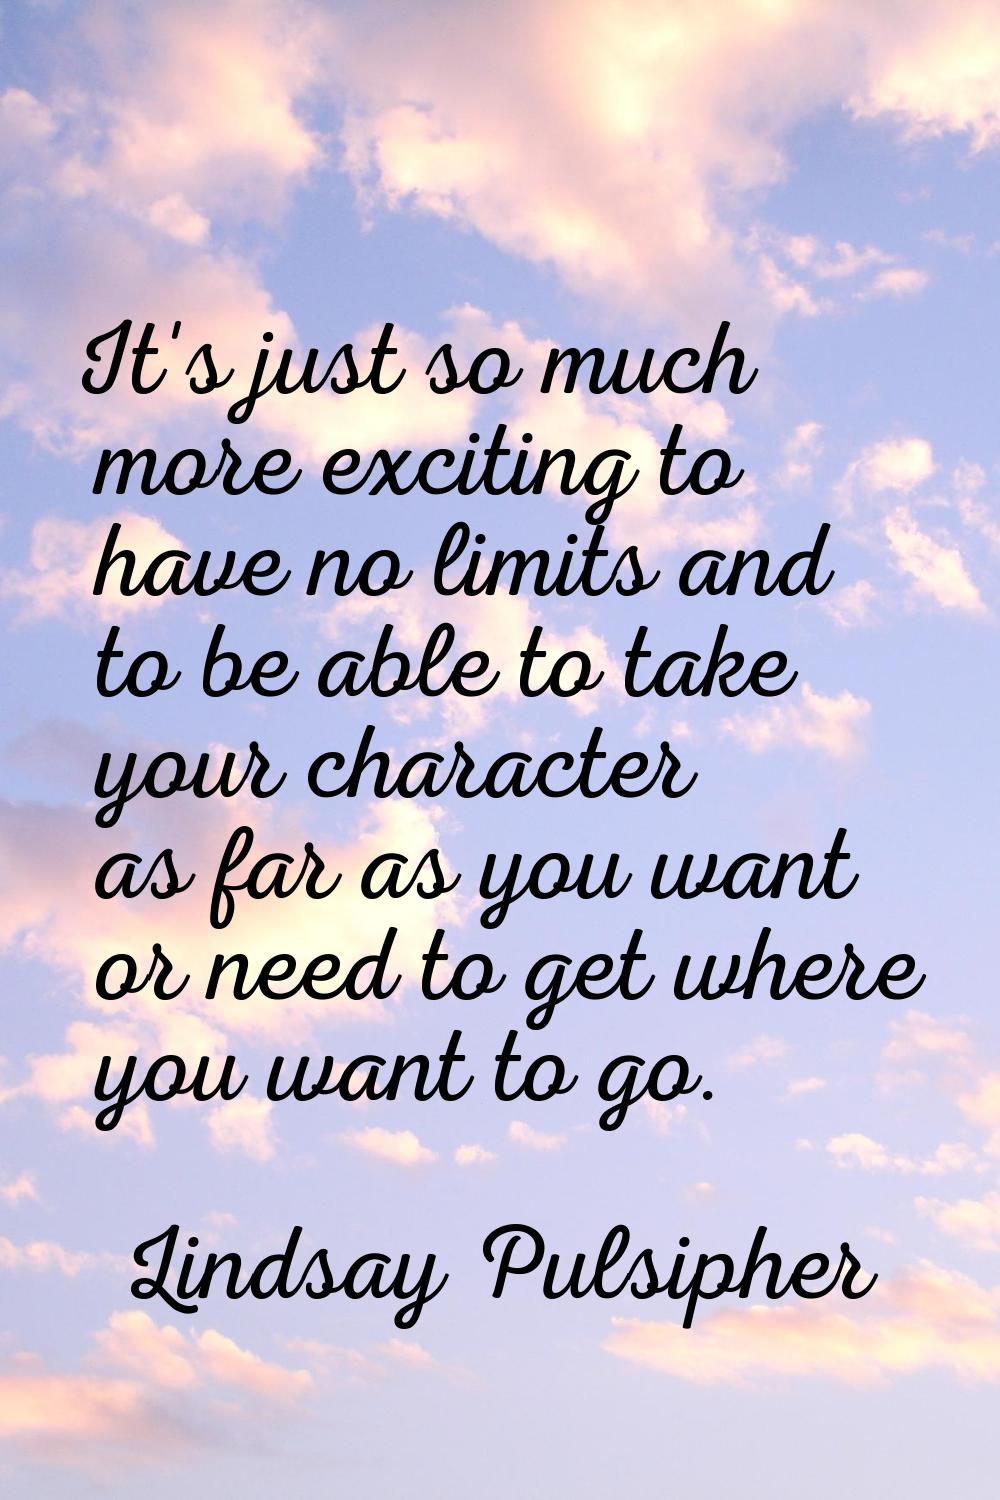 It's just so much more exciting to have no limits and to be able to take your character as far as y